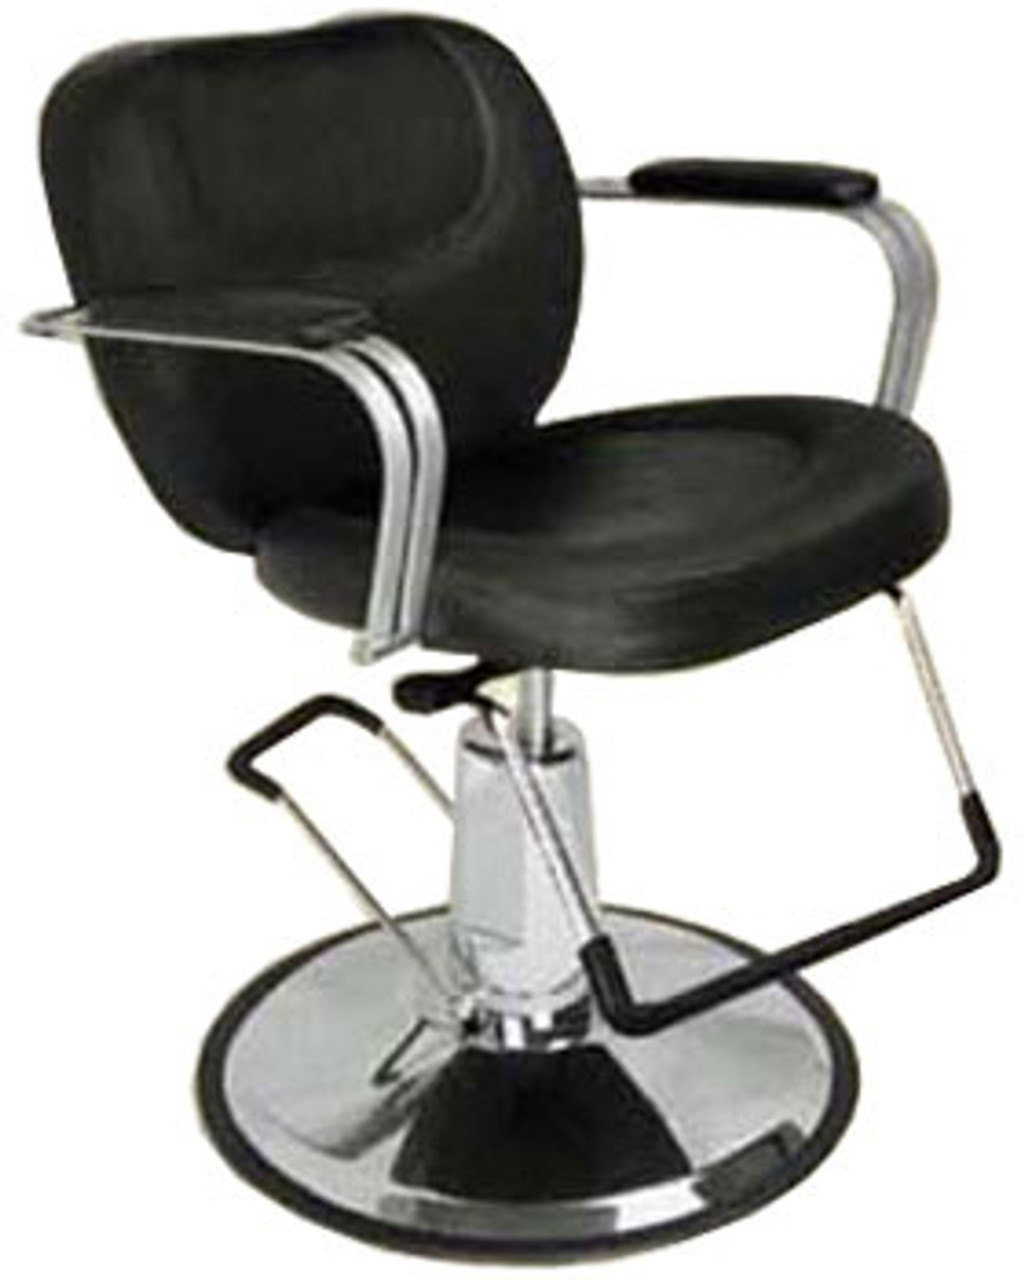 Styling Chair - H5679